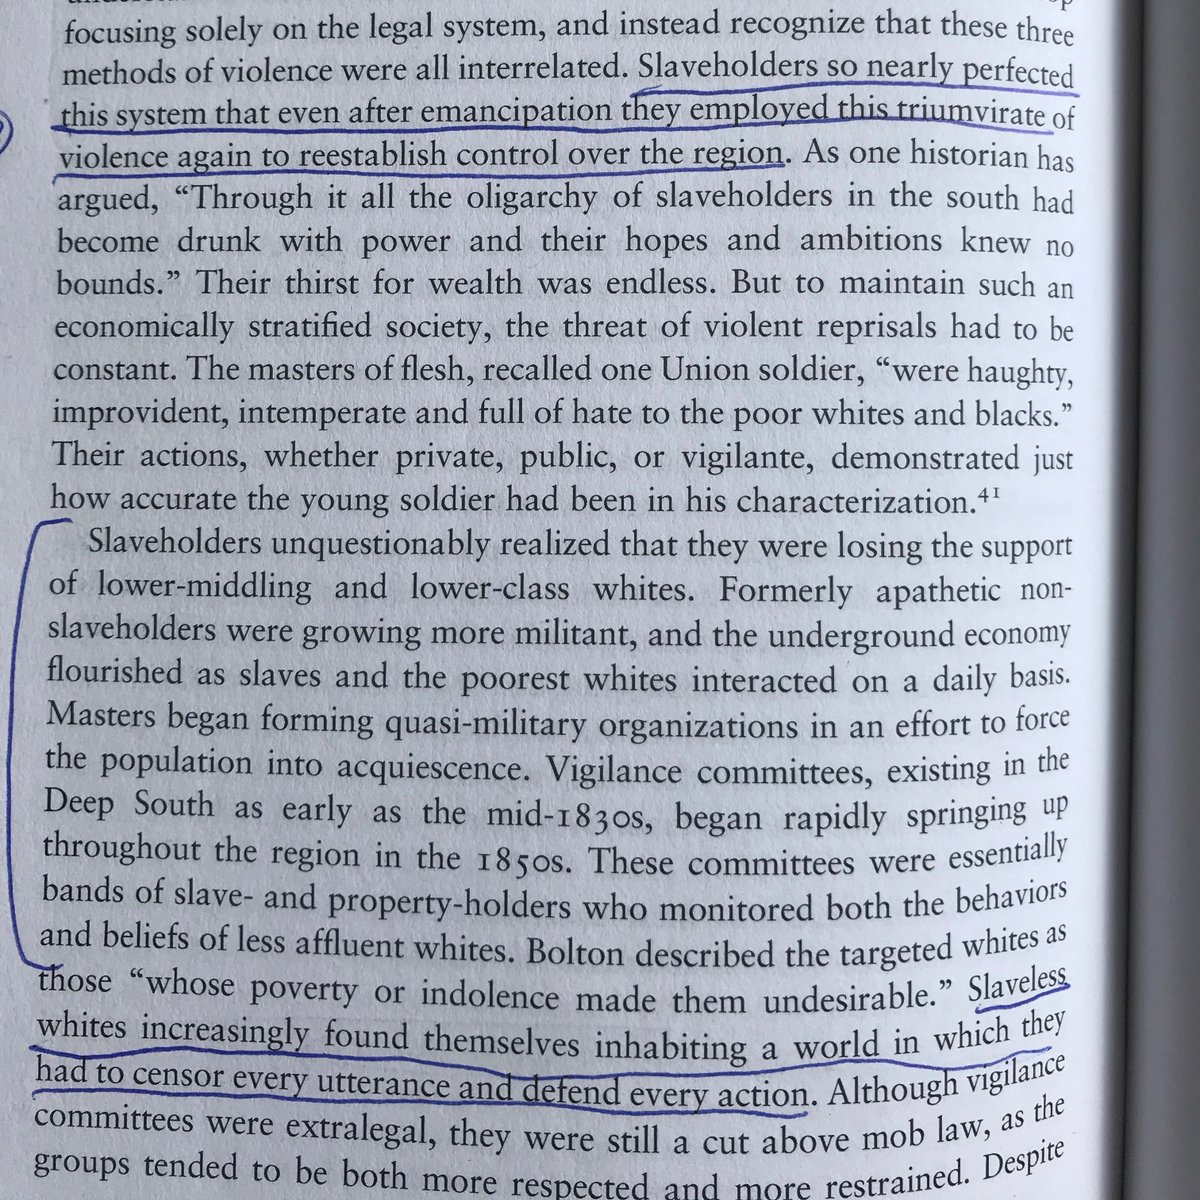 With their repressive measures nominally aimed at white outsider “incendiaries,” slave holding elites were largely successful in disrupting future solidarity between rebellious poor whites and black slaves and laid the groundwork for the vigilante brutality of the Jim Crow era.